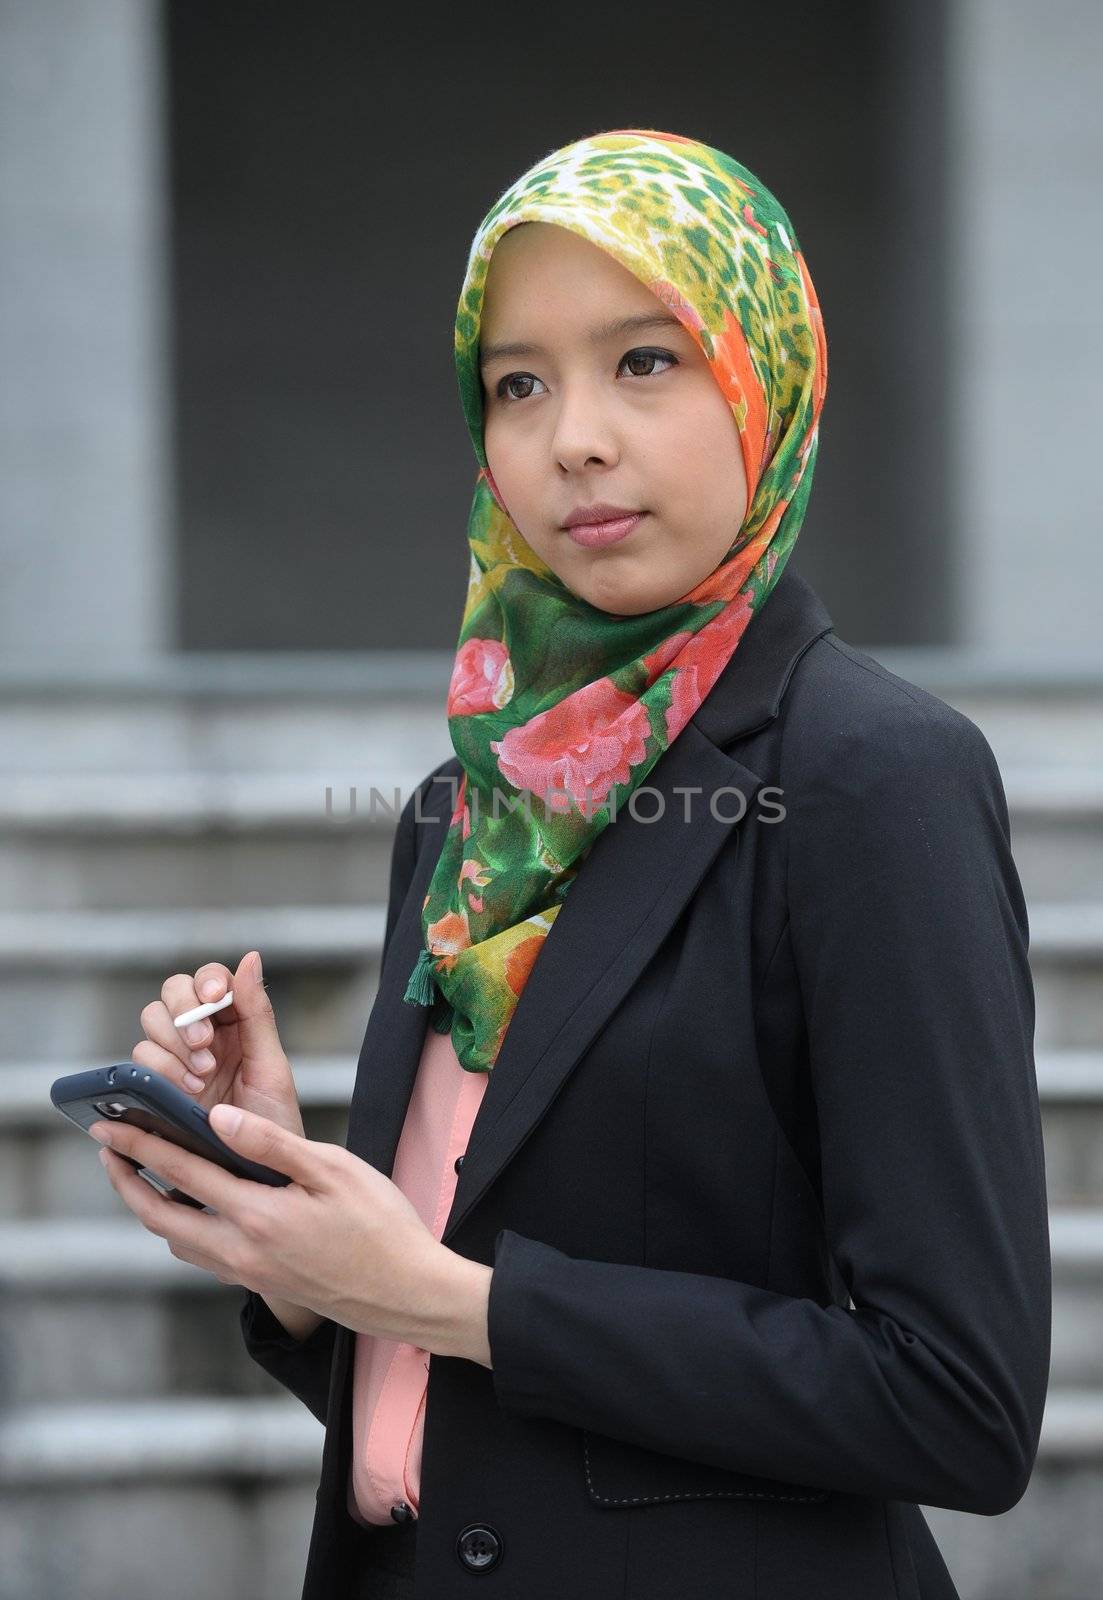 Scarf girl use smart phone by jaggat